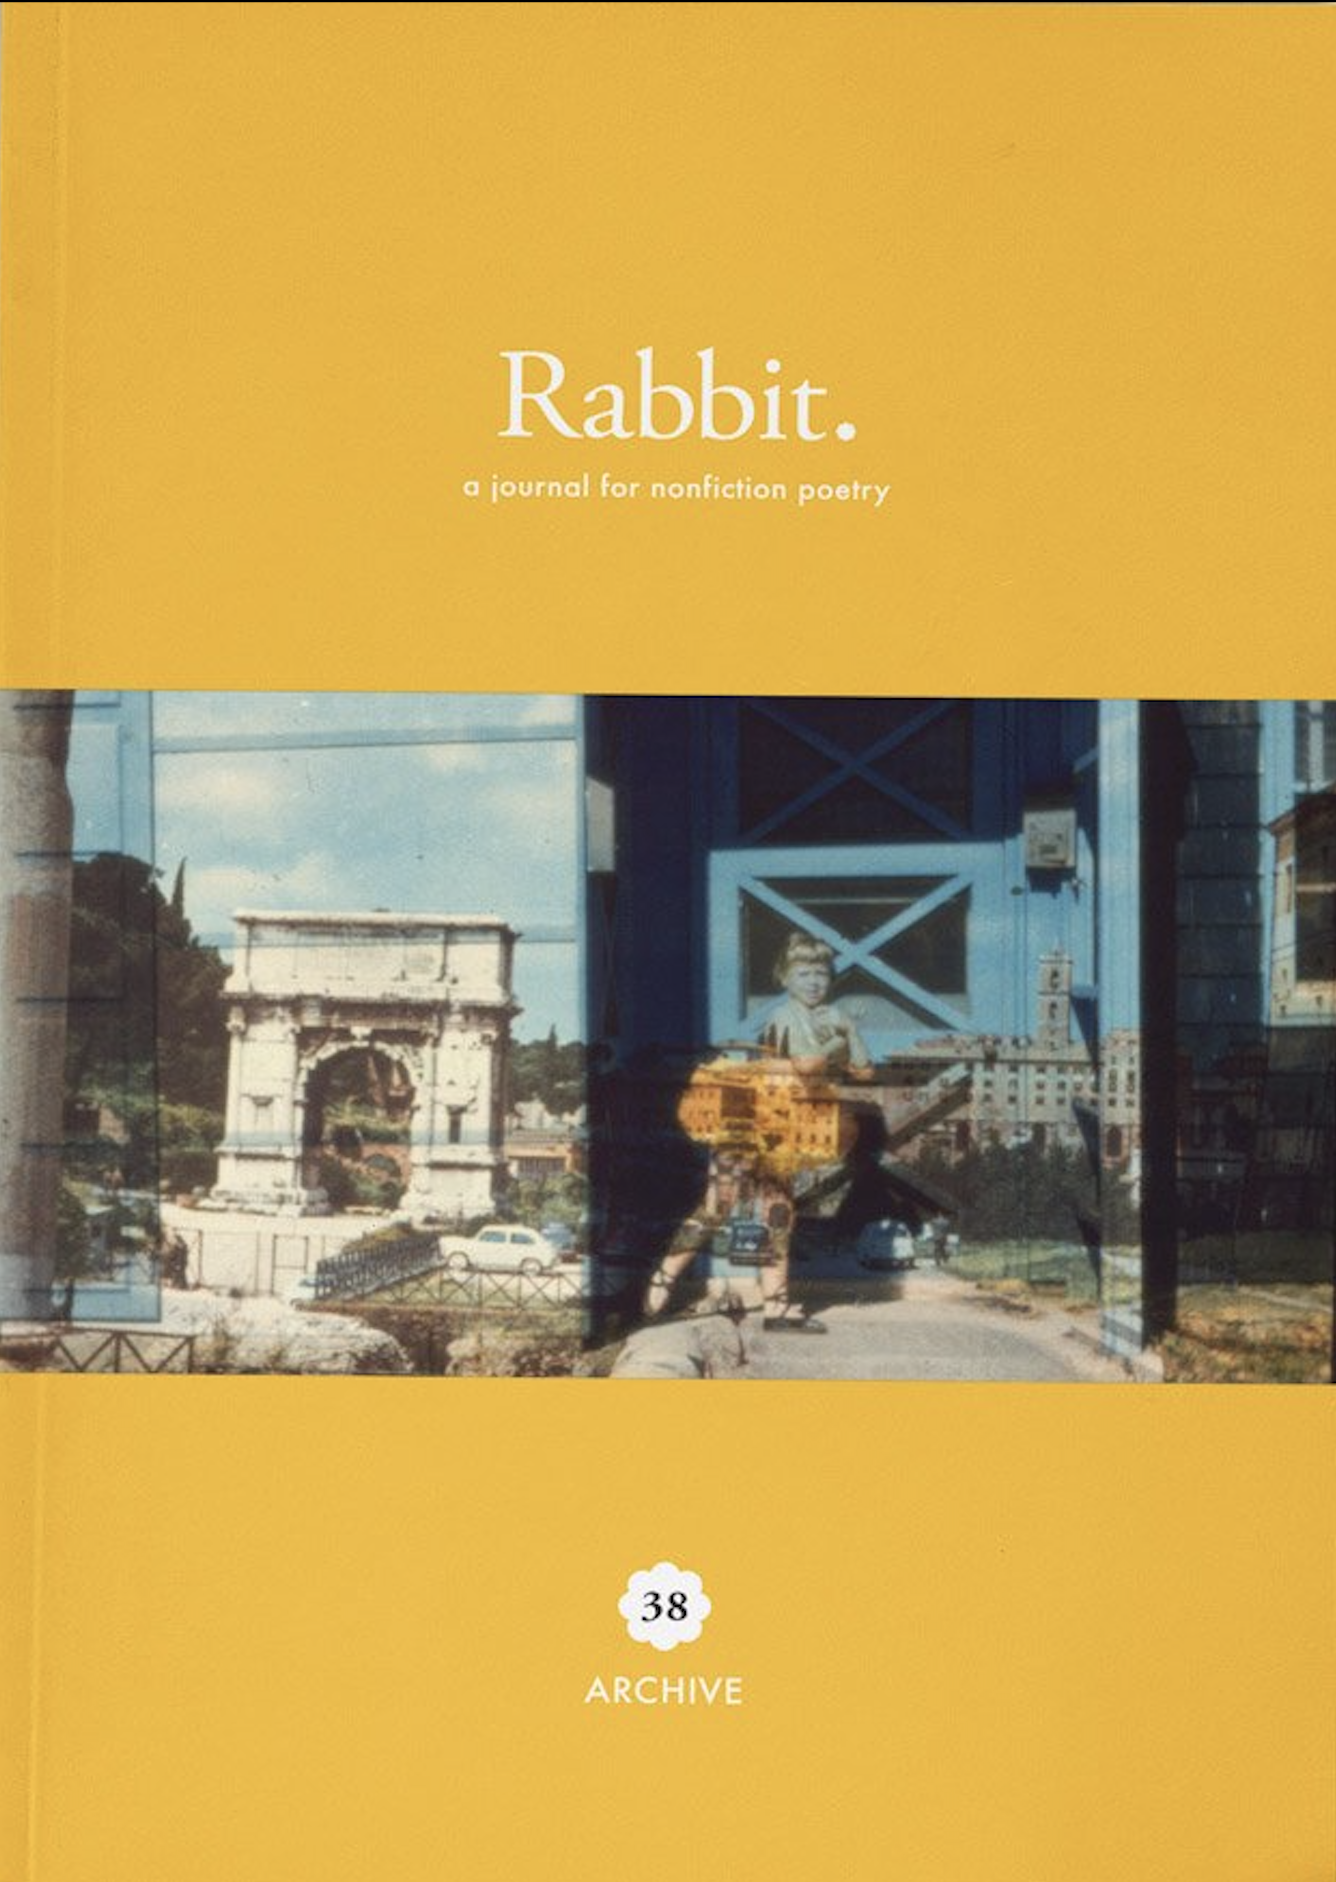 The front cover of Rabbit literary journal. The text reads ‘Rabbit. A journal for nonfiction poetry. 38 Archive’ on a mustard yellow background. In the centre of the cover is a photograph of various buildings and a young girl in a ballerina costume. The photographs are overlapped in different gradients.